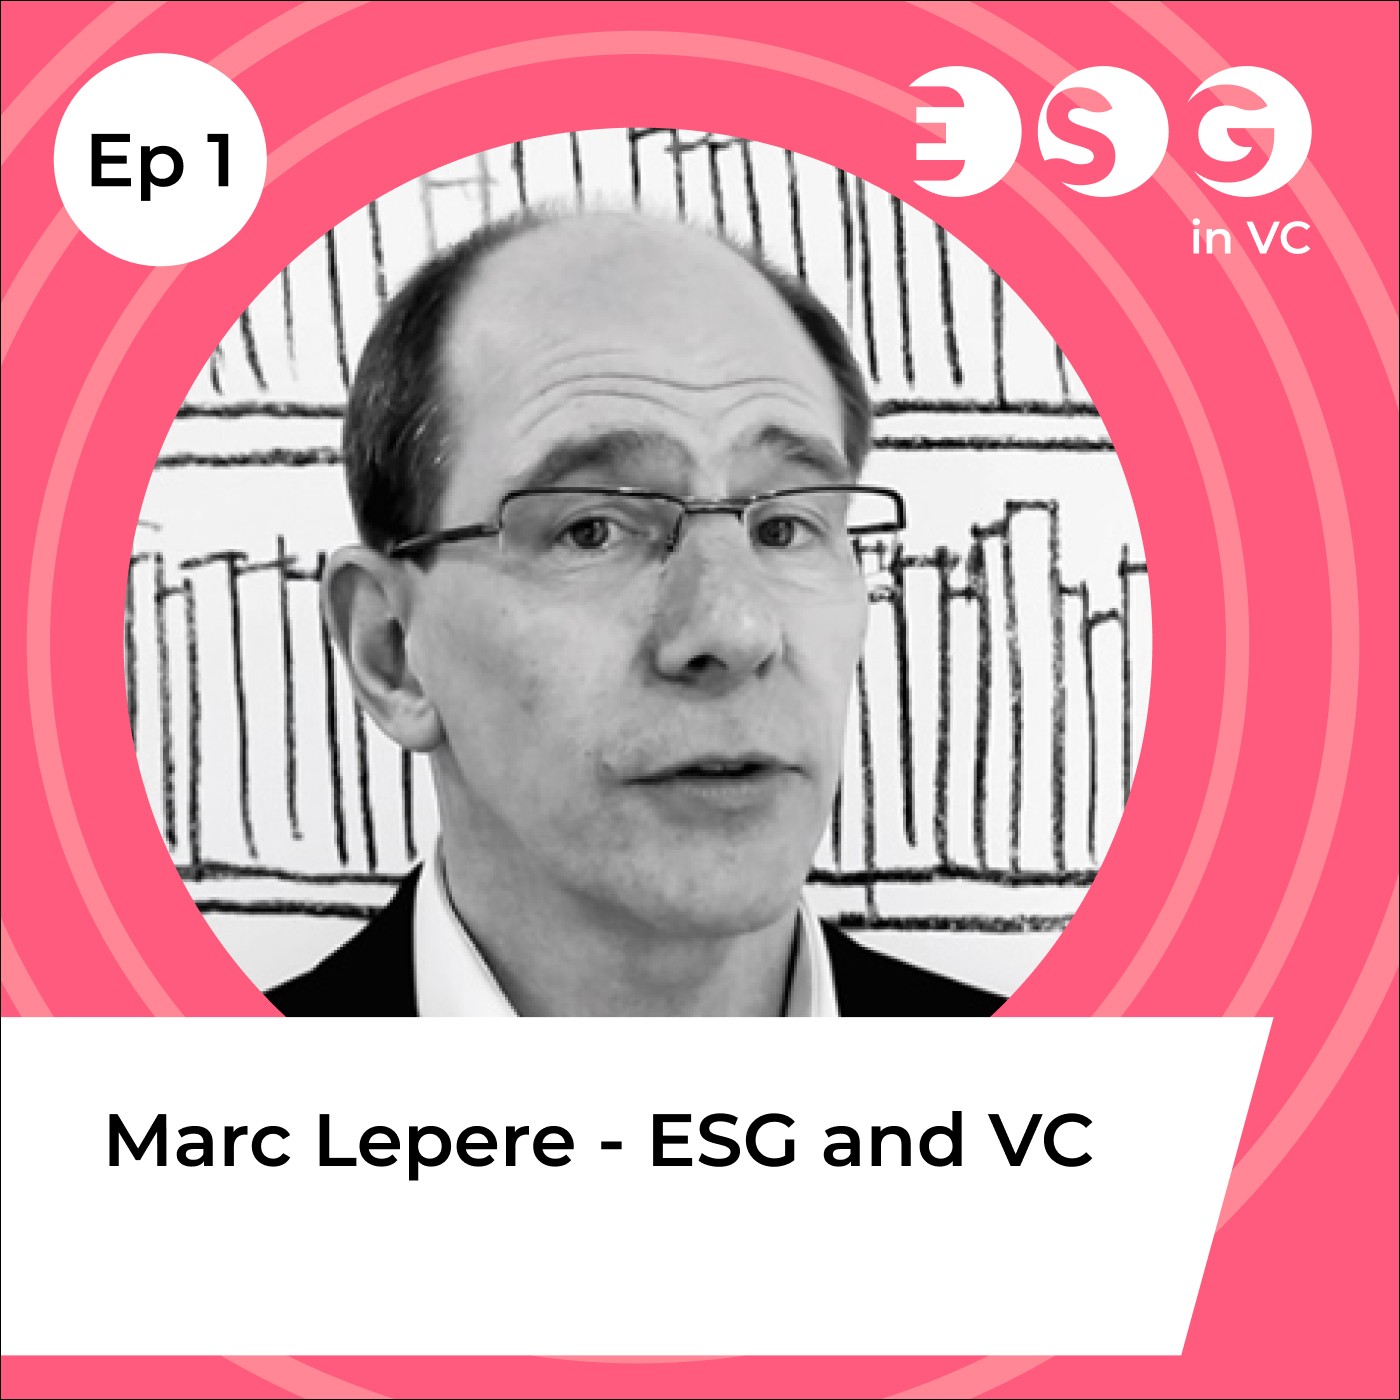 Ep 1 - Marc Lepere - ESG and VC